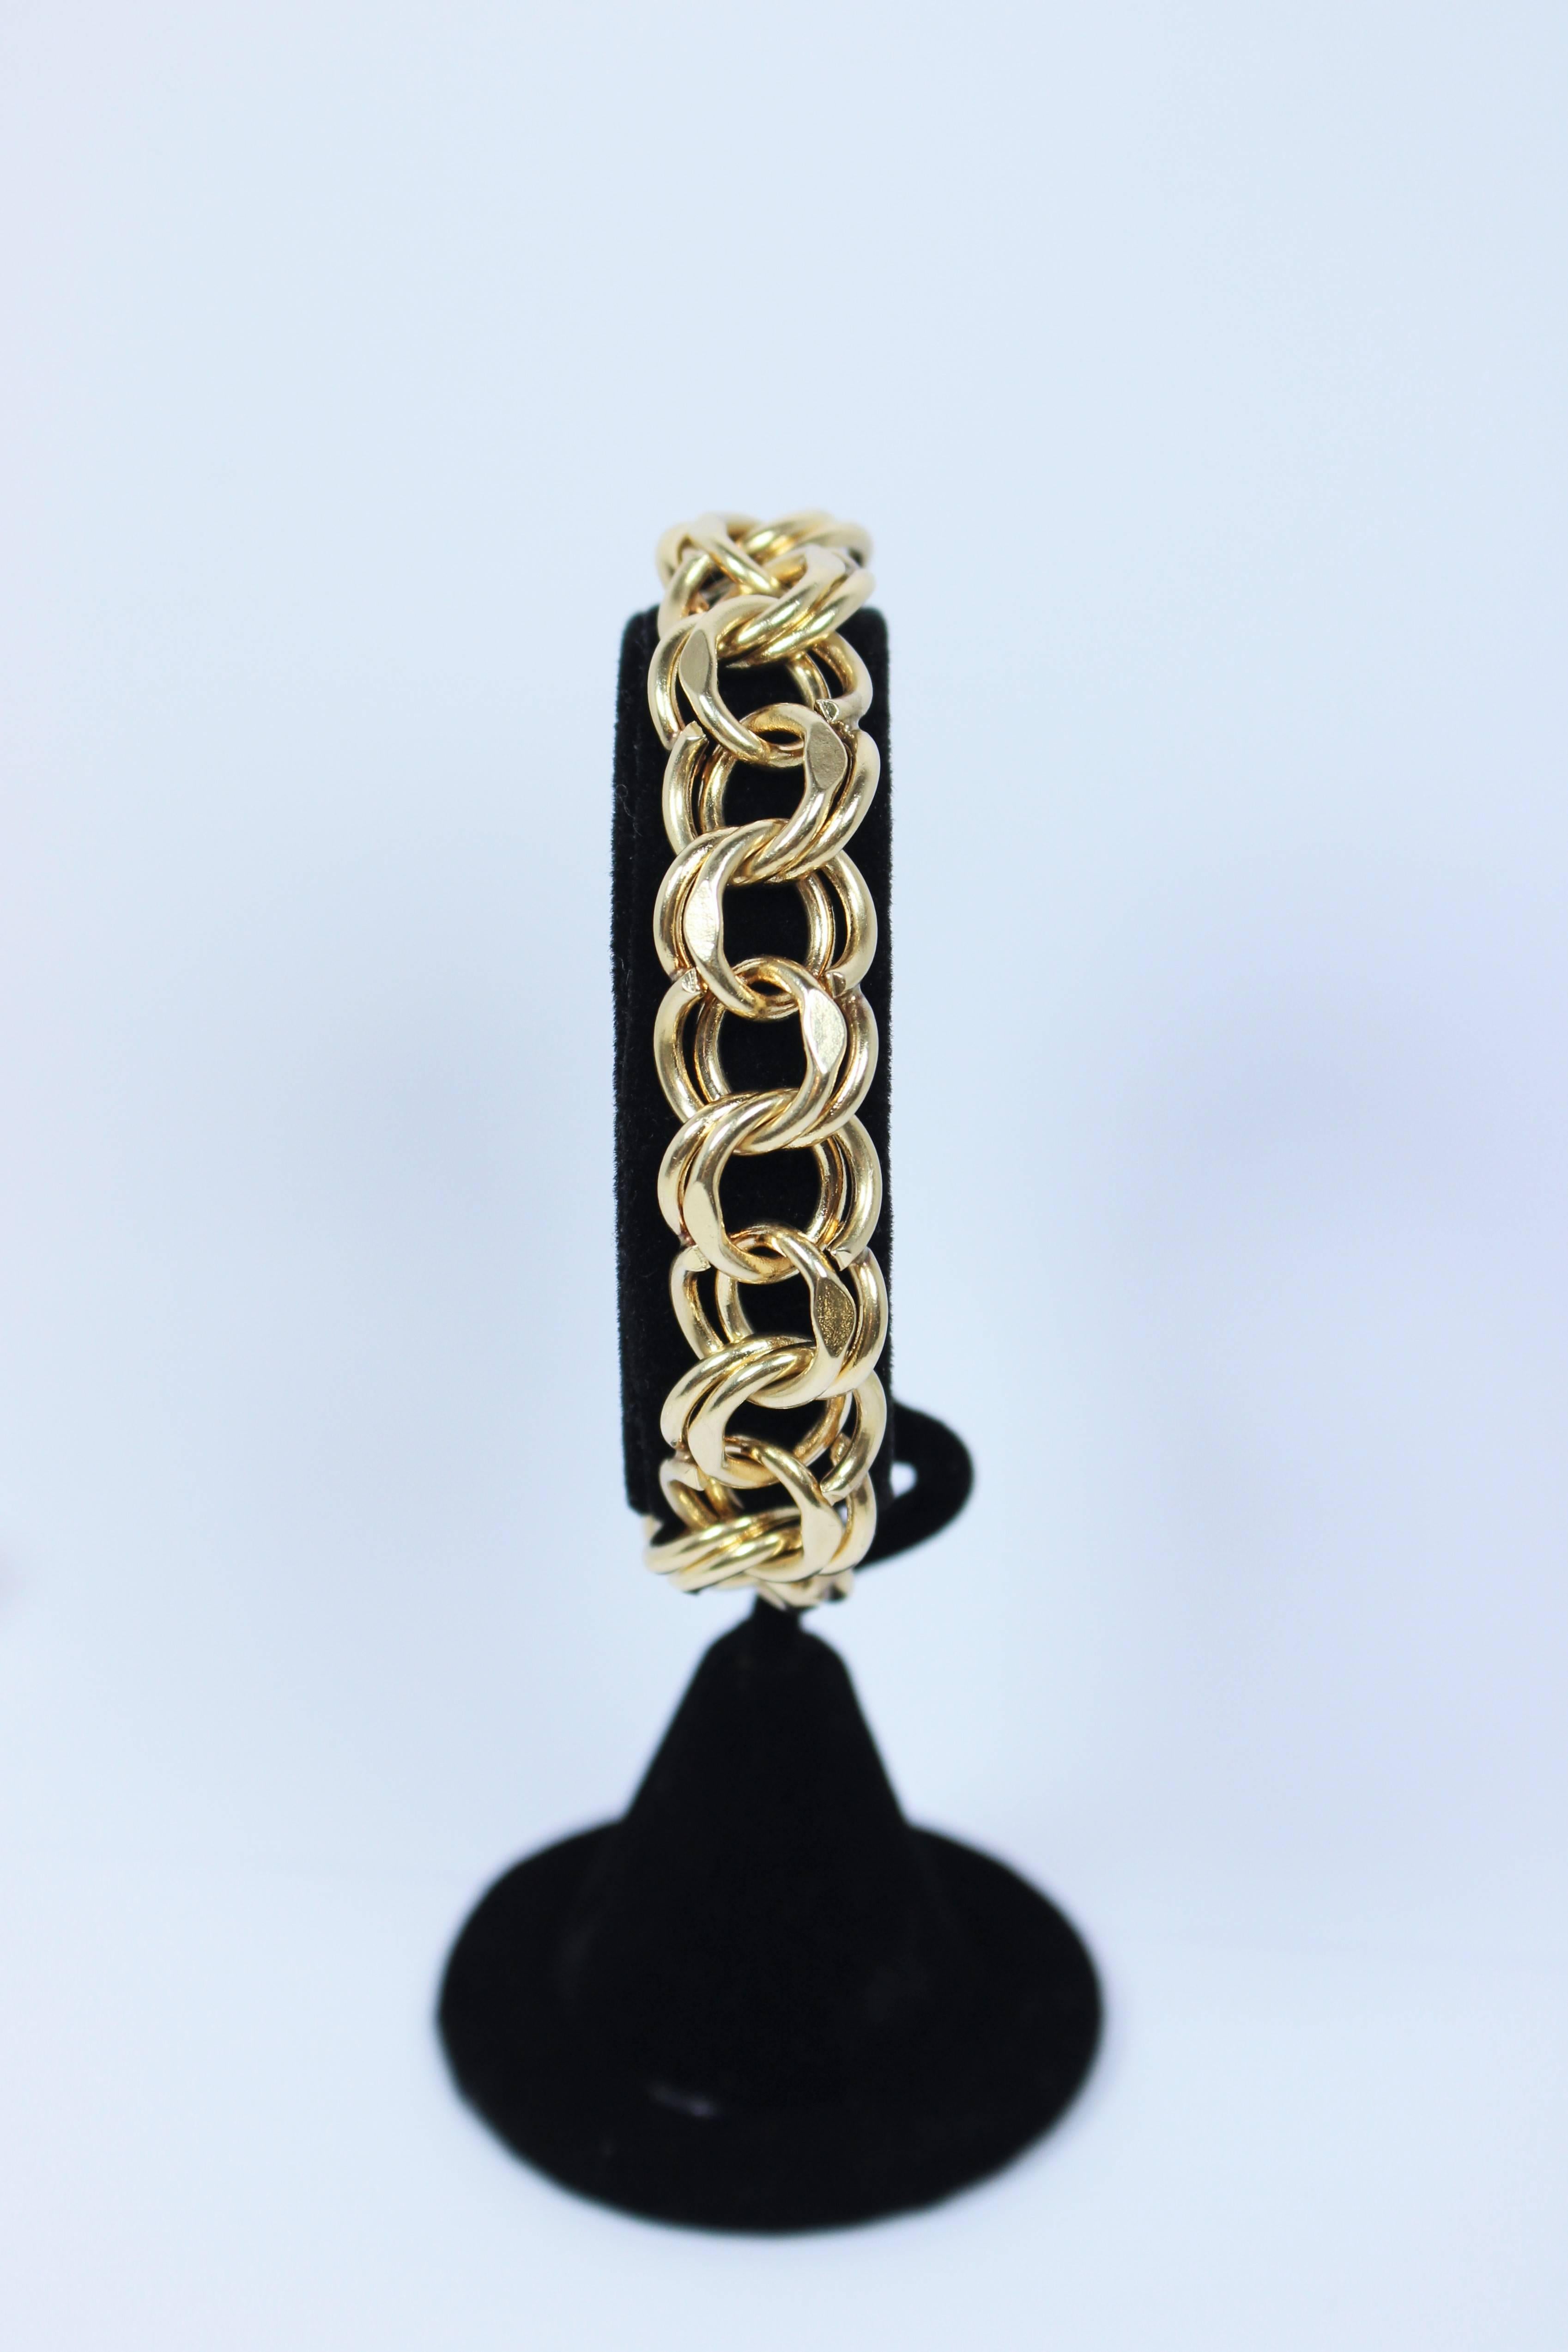 This bracelet is composed of 14KT yellow gold with a chain link design. In excellent vintage condition.

Specs: 
14KT Yellow Gold Approximately 55Grams
 
Length: 6 5/8